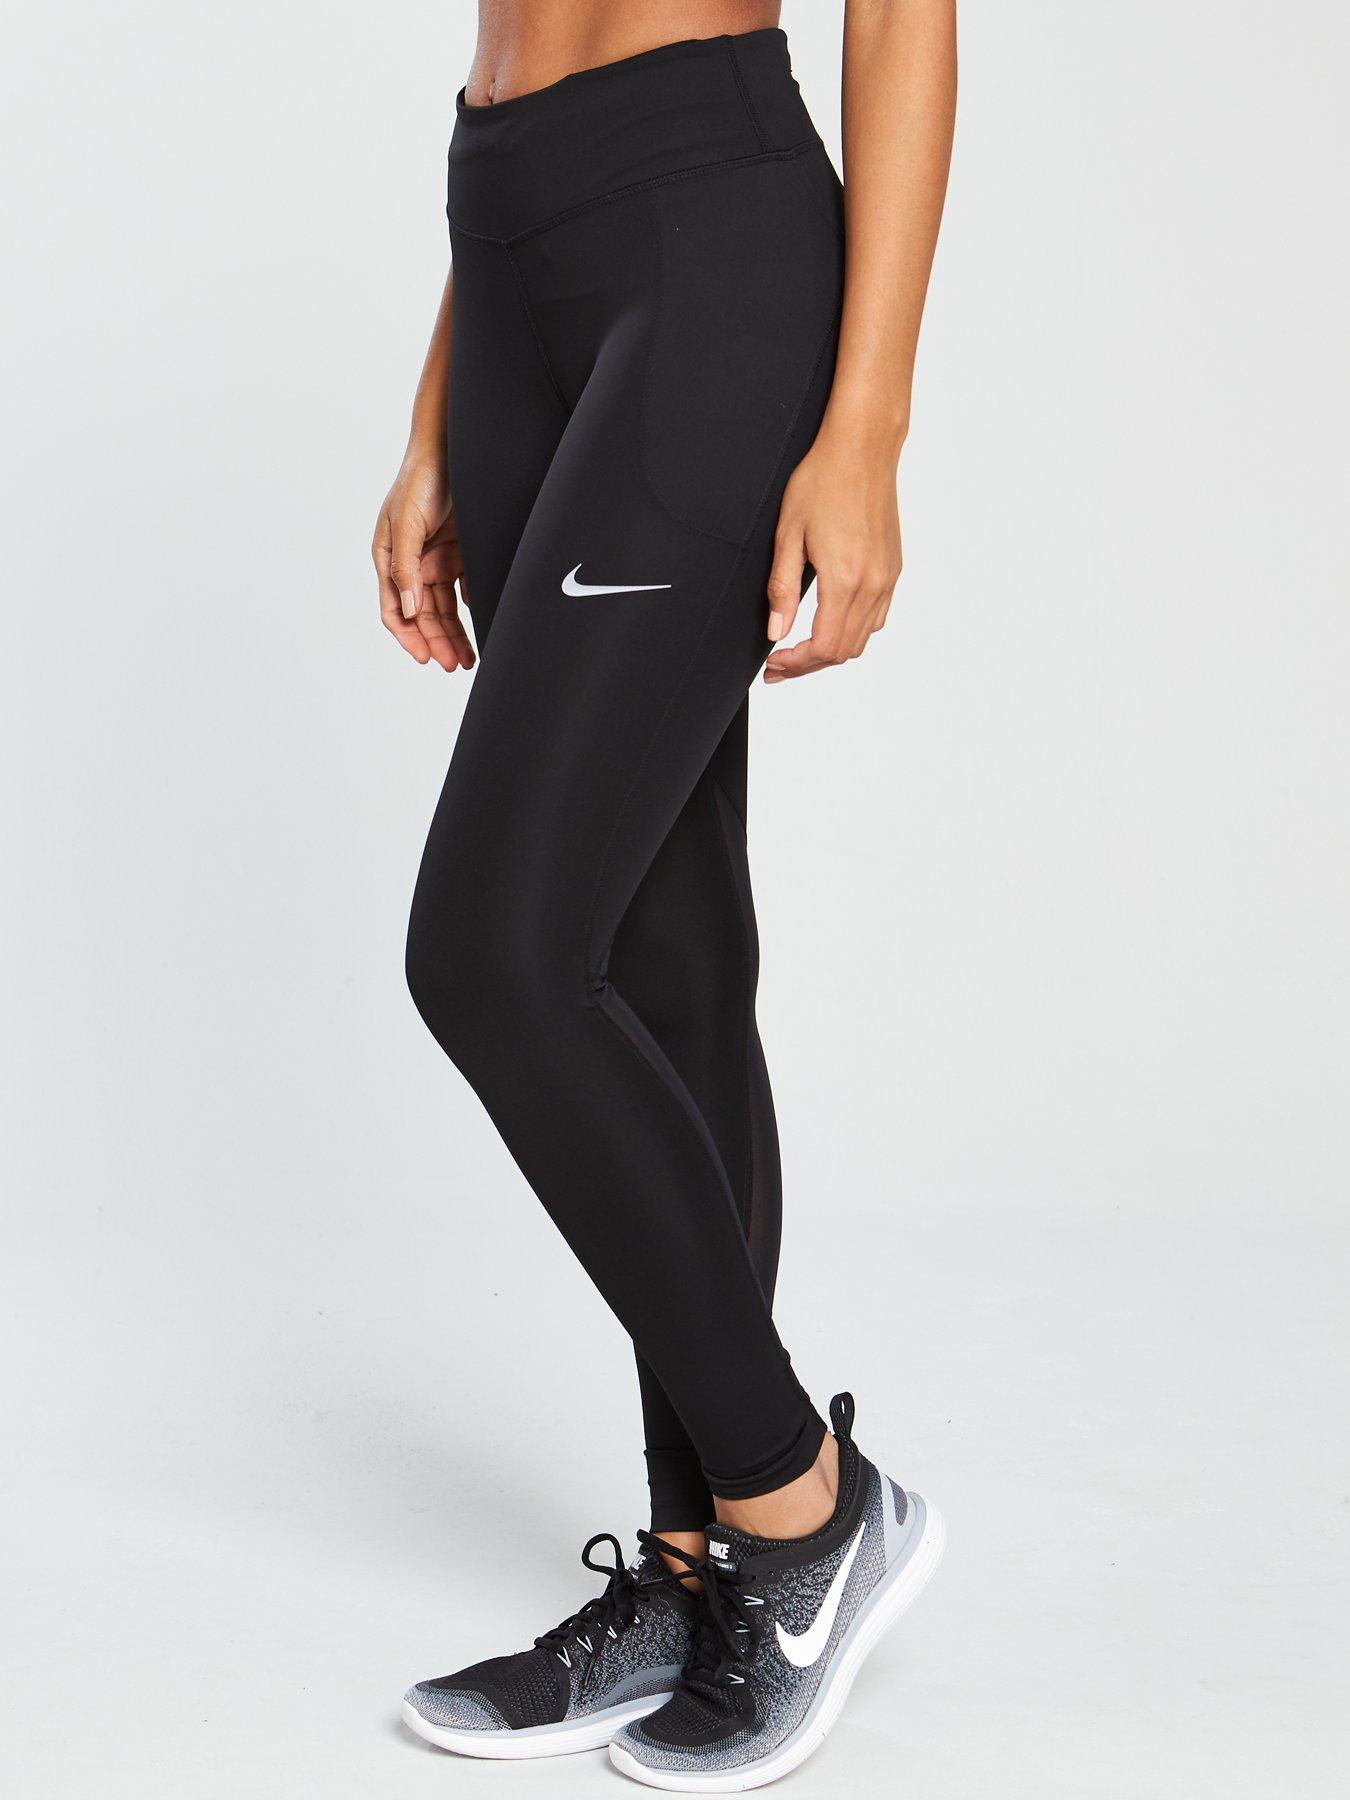 Nike Running tights FAST in black/ white